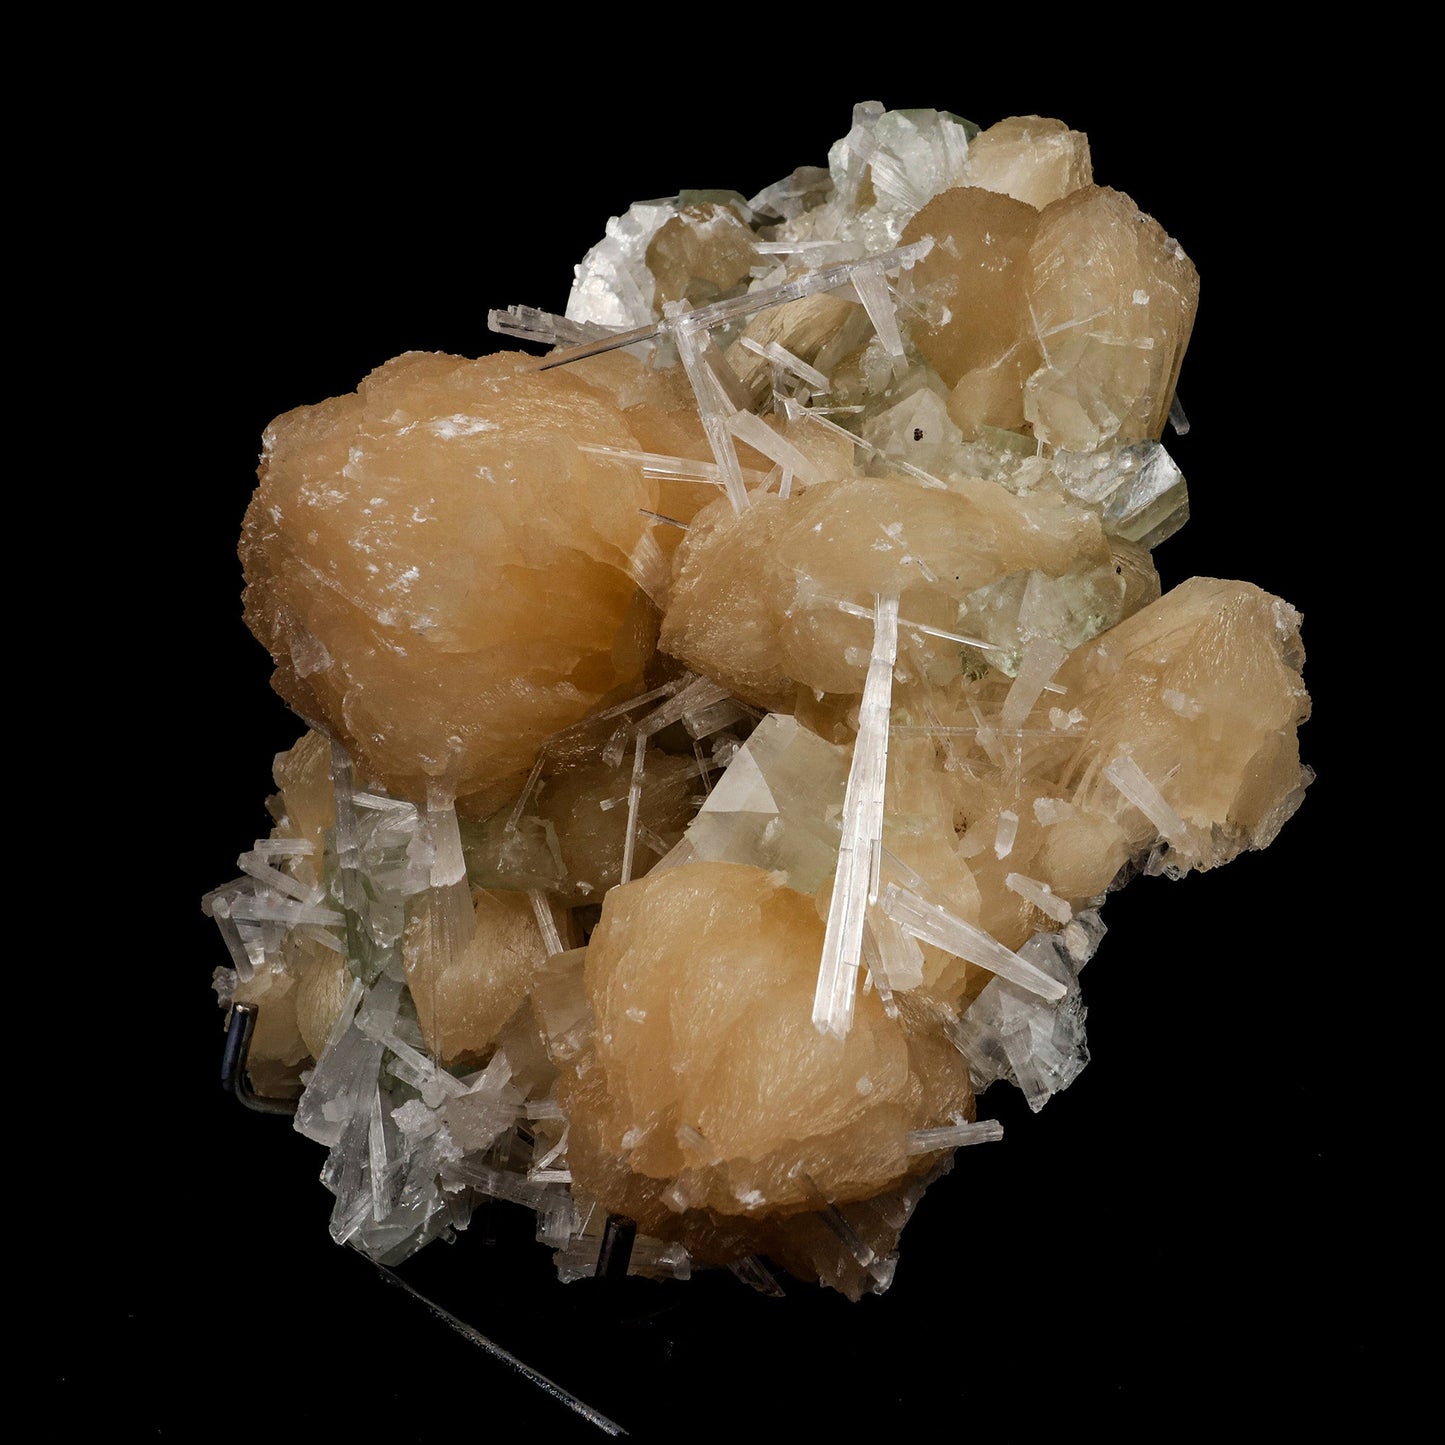 Stilbite with Scoecite Spray Apophyllite Natural Mineral Specimen # B…  https://www.superbminerals.us/products/stilbite-with-scoecite-spray-apophyllite-natural-mineral-specimen-b-5232  Features: A very aesthetic combination piece featuring numerous large, lustrous green modified cubes on a dark-brown matrix hosting numerous acicular sprays of colorless to white, satiny Scolecite. Primary Mineral(s): StilbiteSecondary Mineral(s): Apophyllite, ScoleciteMatrix: N/A 7 Inch x 6 InchWeight : 1410